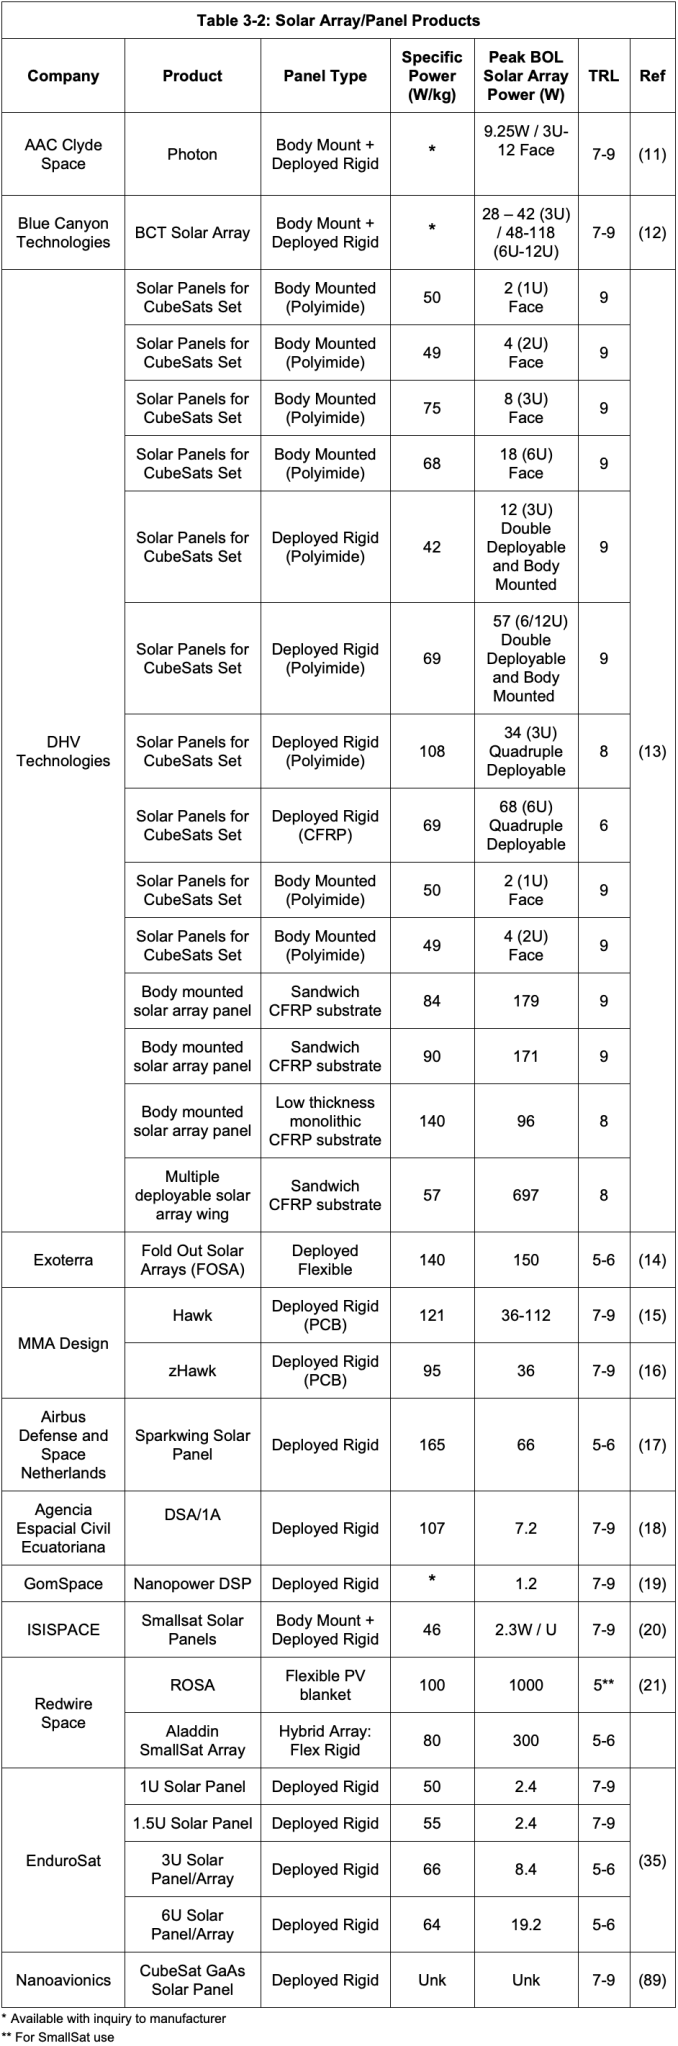 Table 3 2: Solar Array/Panel Products (see PDF file)